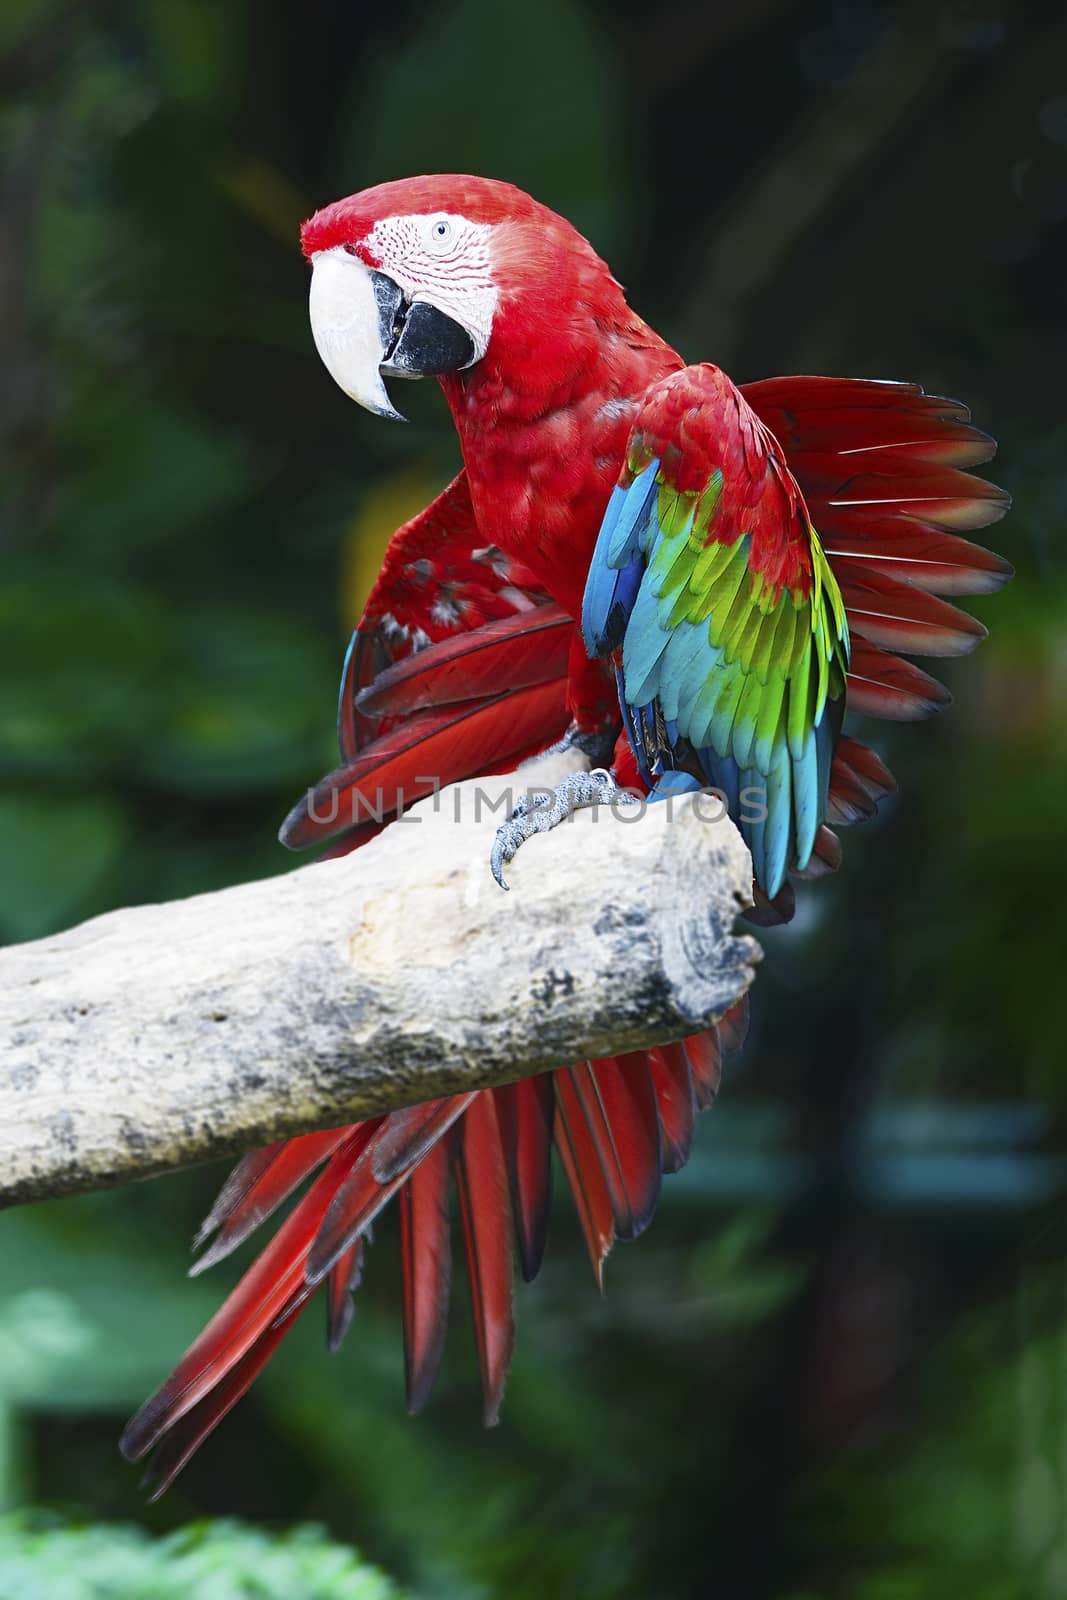 Beautiful parrot bird, Greenwinged Macaw, standing on the log, side profile